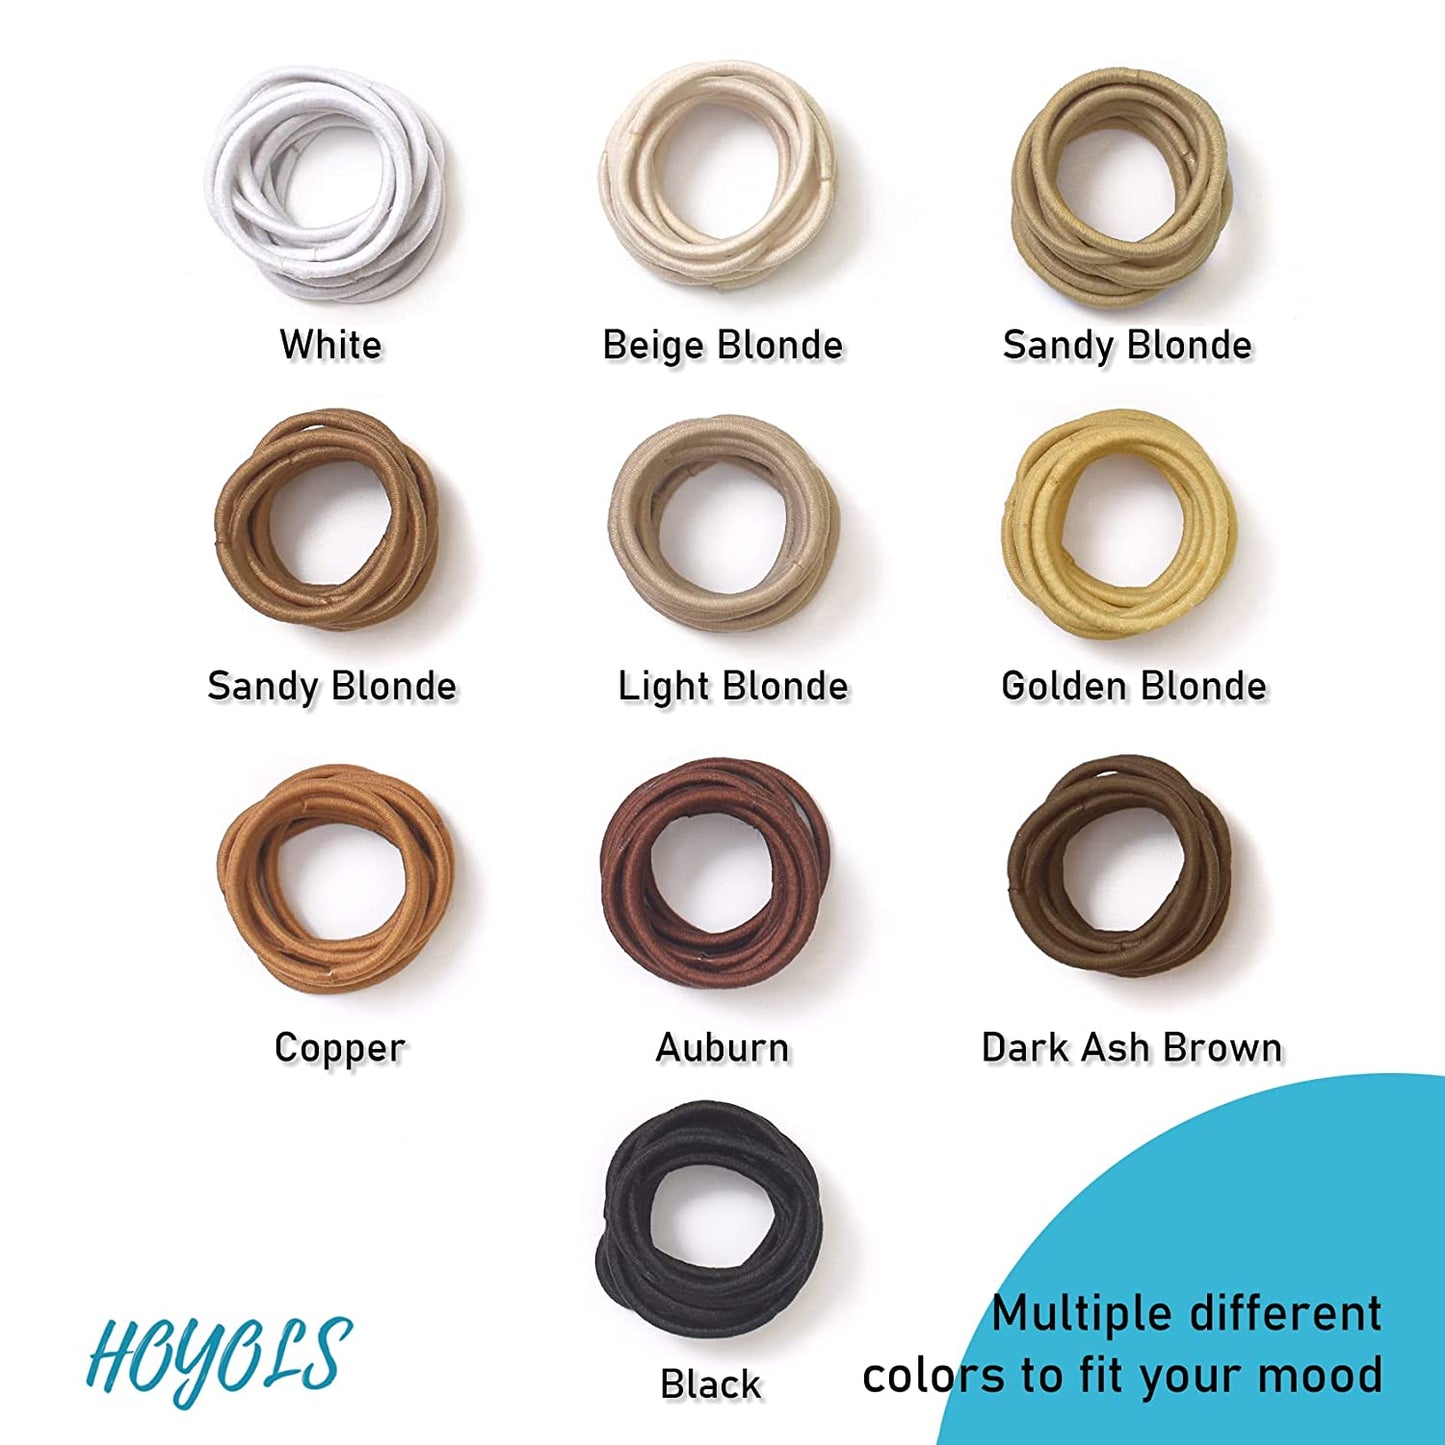 Hoyols Small Thin Small Hair Ties Elastics, 1 inch No Metal Hair Bands Styling Accessories for Girls Teenage Kids Men Hair & Ties Pony tail Fine Hair 2mm 100 Count (Copper)